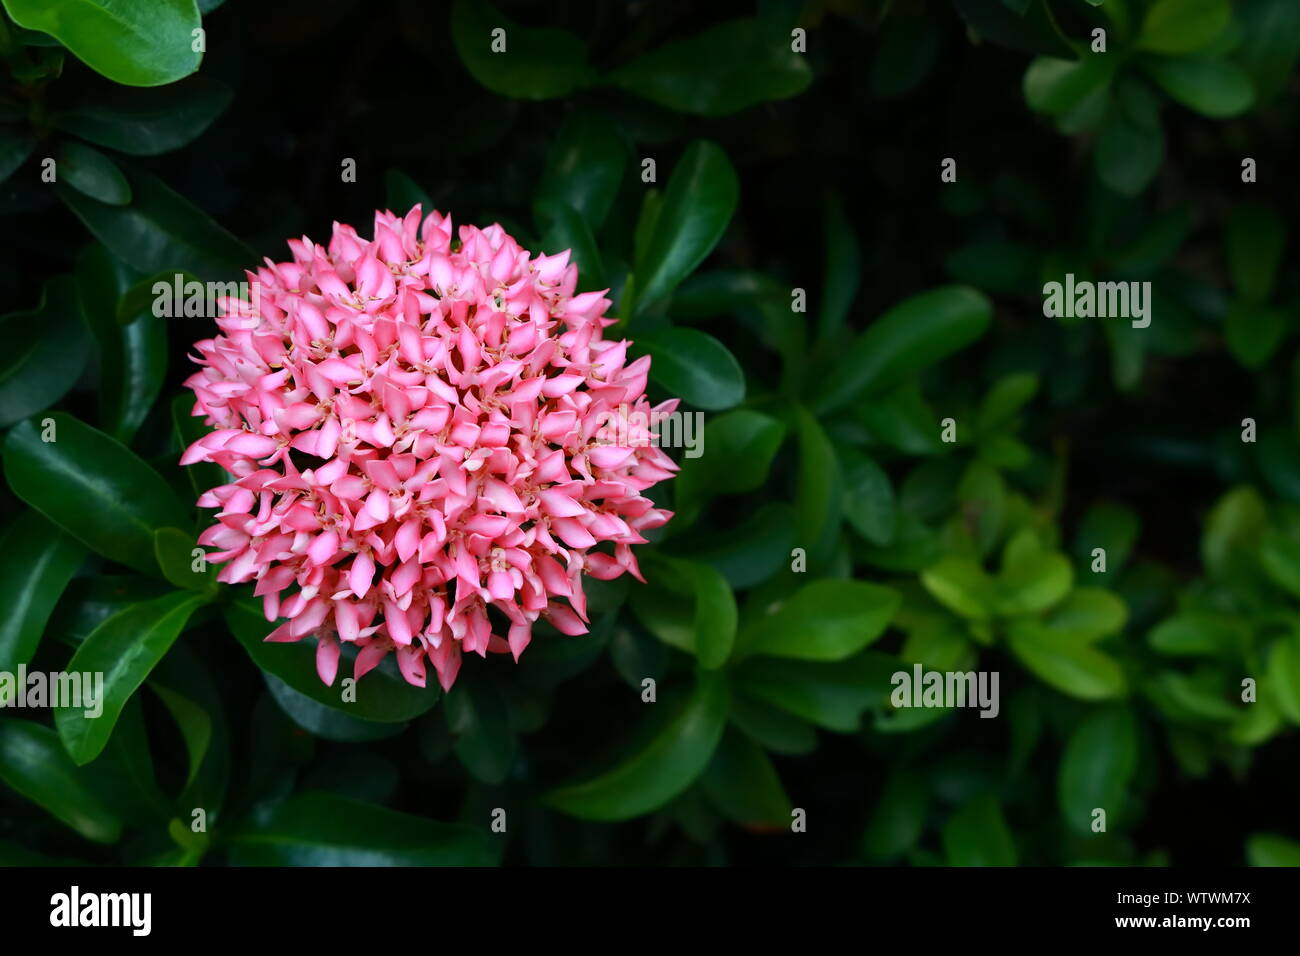 Beautiful round shape blooming pink ixora or west indian jasmine, tropical plant Stock Photo